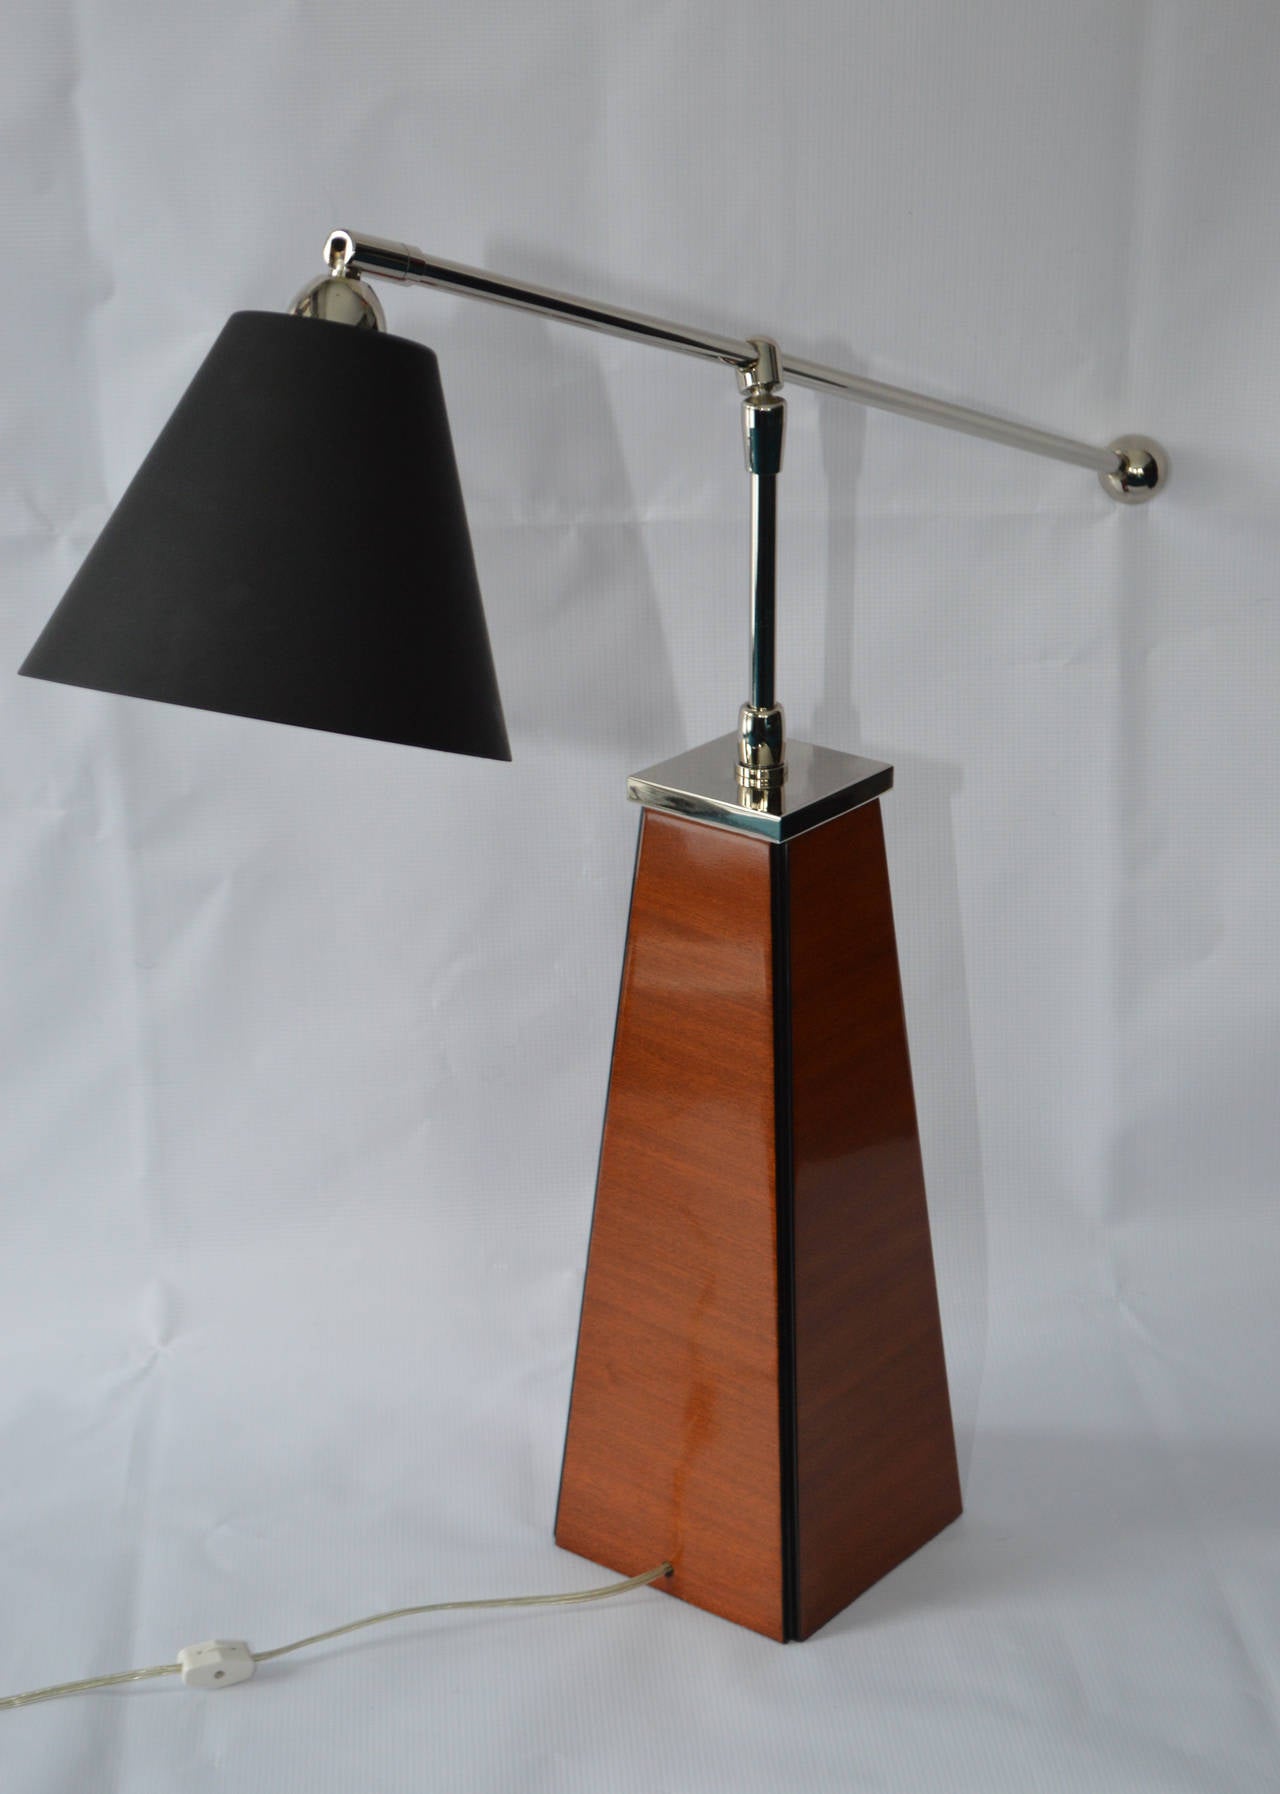 Ribbon striped mahogany with pivoting stainless steel weighted arm and swivel black steel shade, modern twist on traditional style desk lamp, tapered design